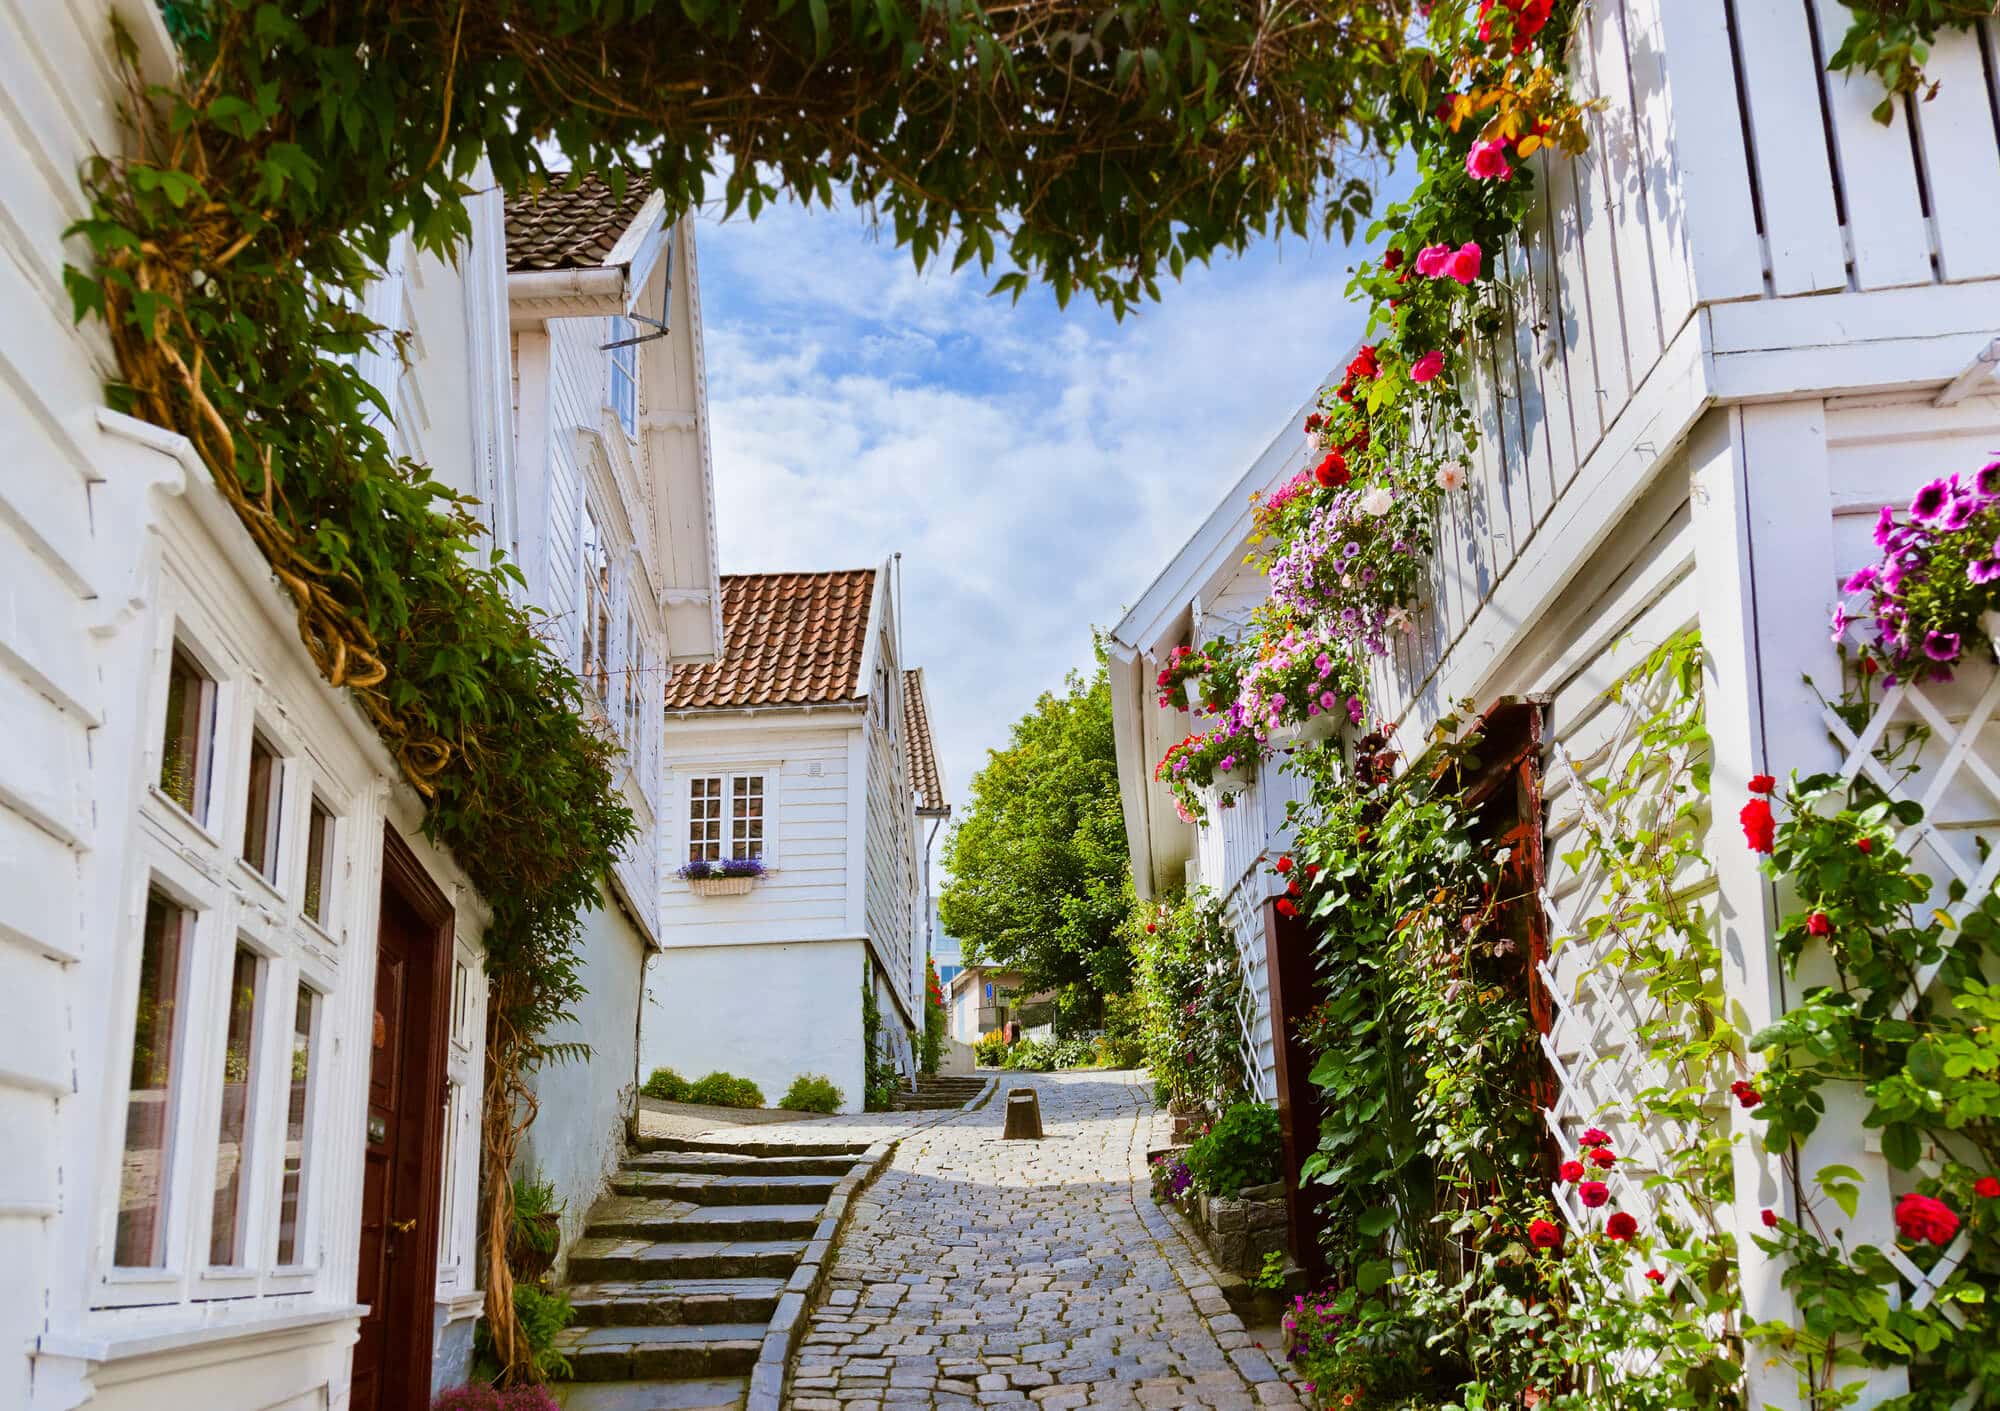 Best things to do in Norway summer - Go for a stroll among the old houses in Stavanger